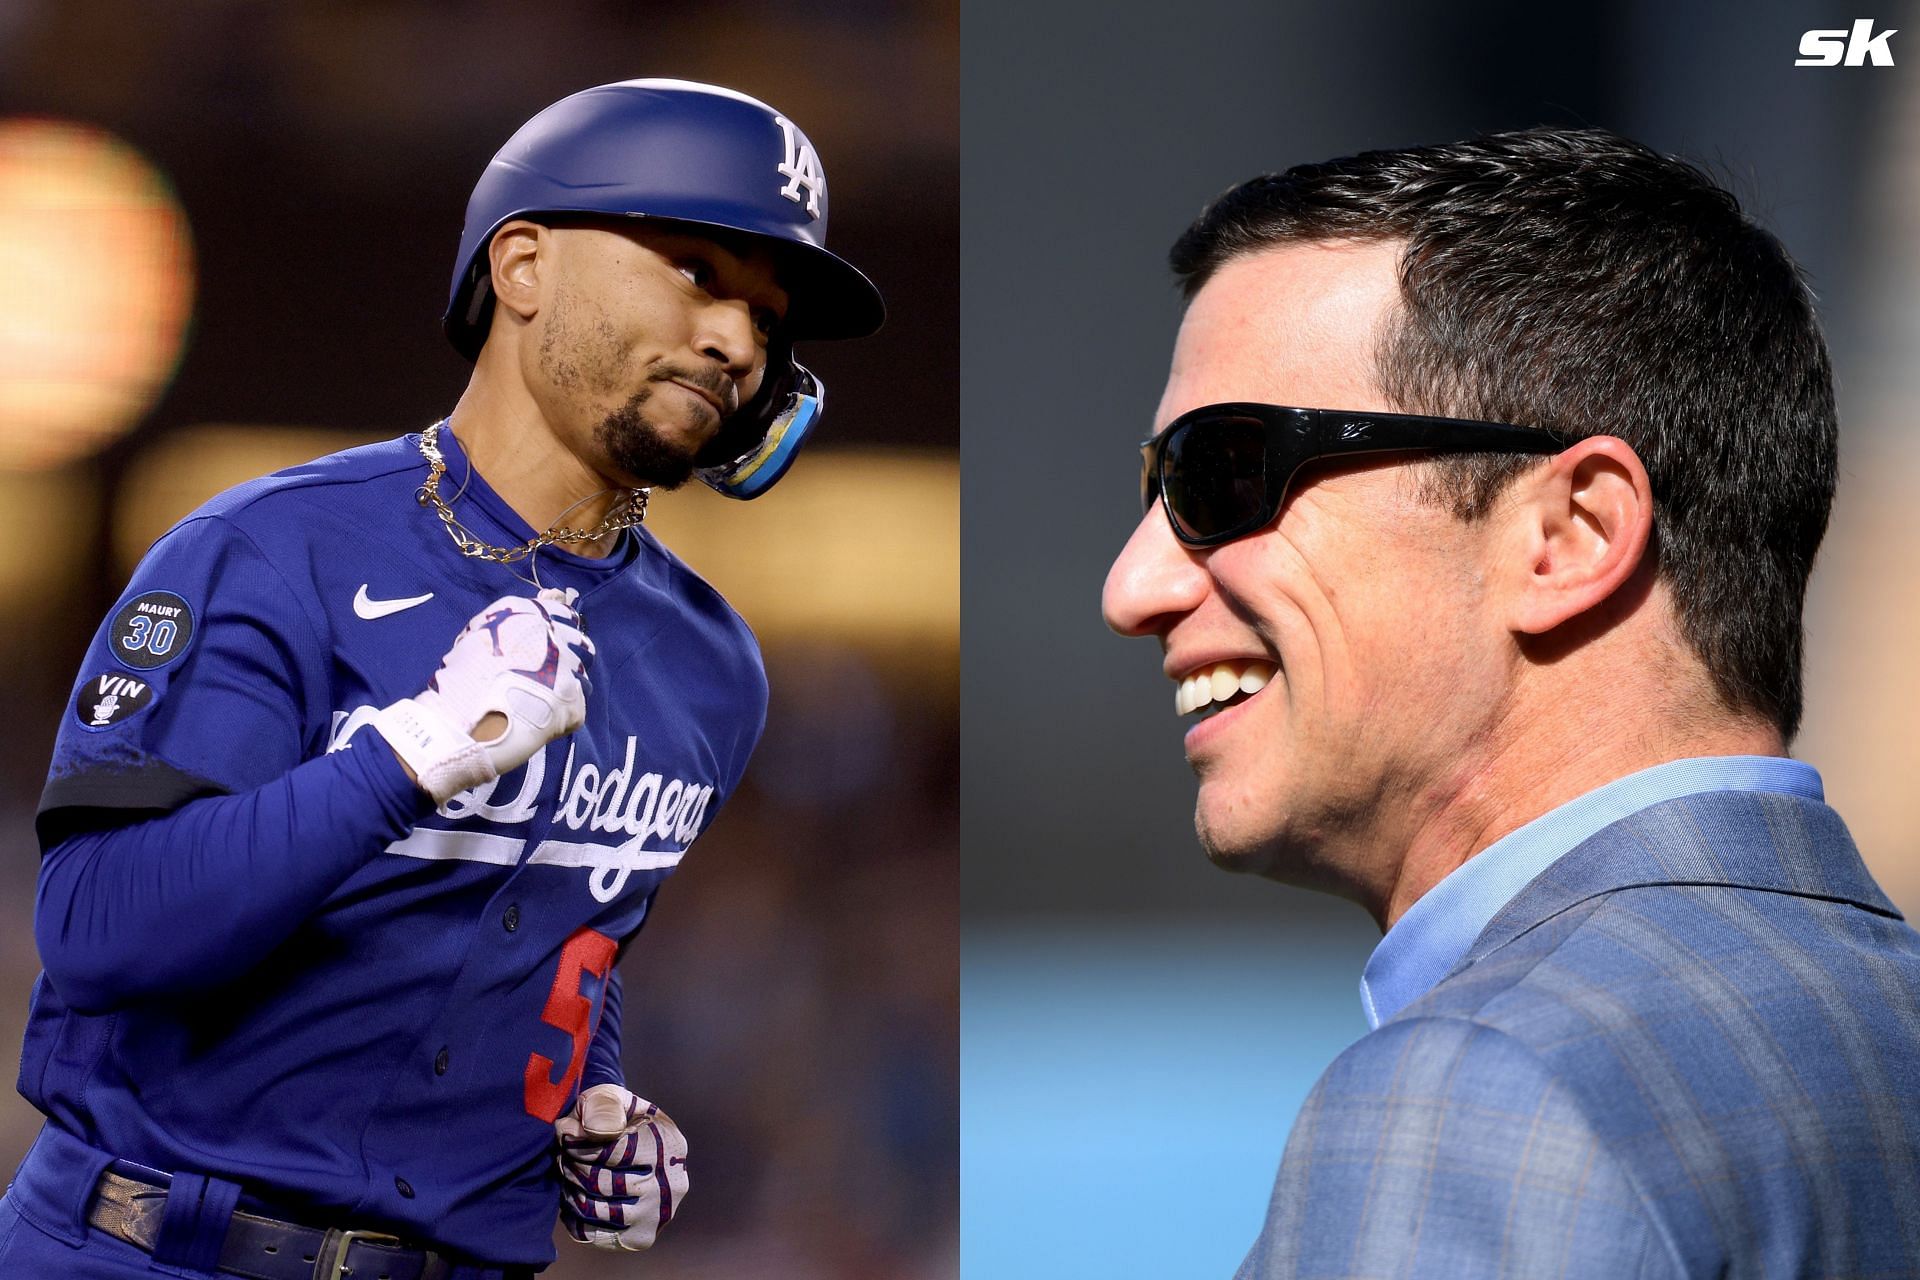 Dodgers President Andrew Friedman believes Betts will stay at Shortstop till trade